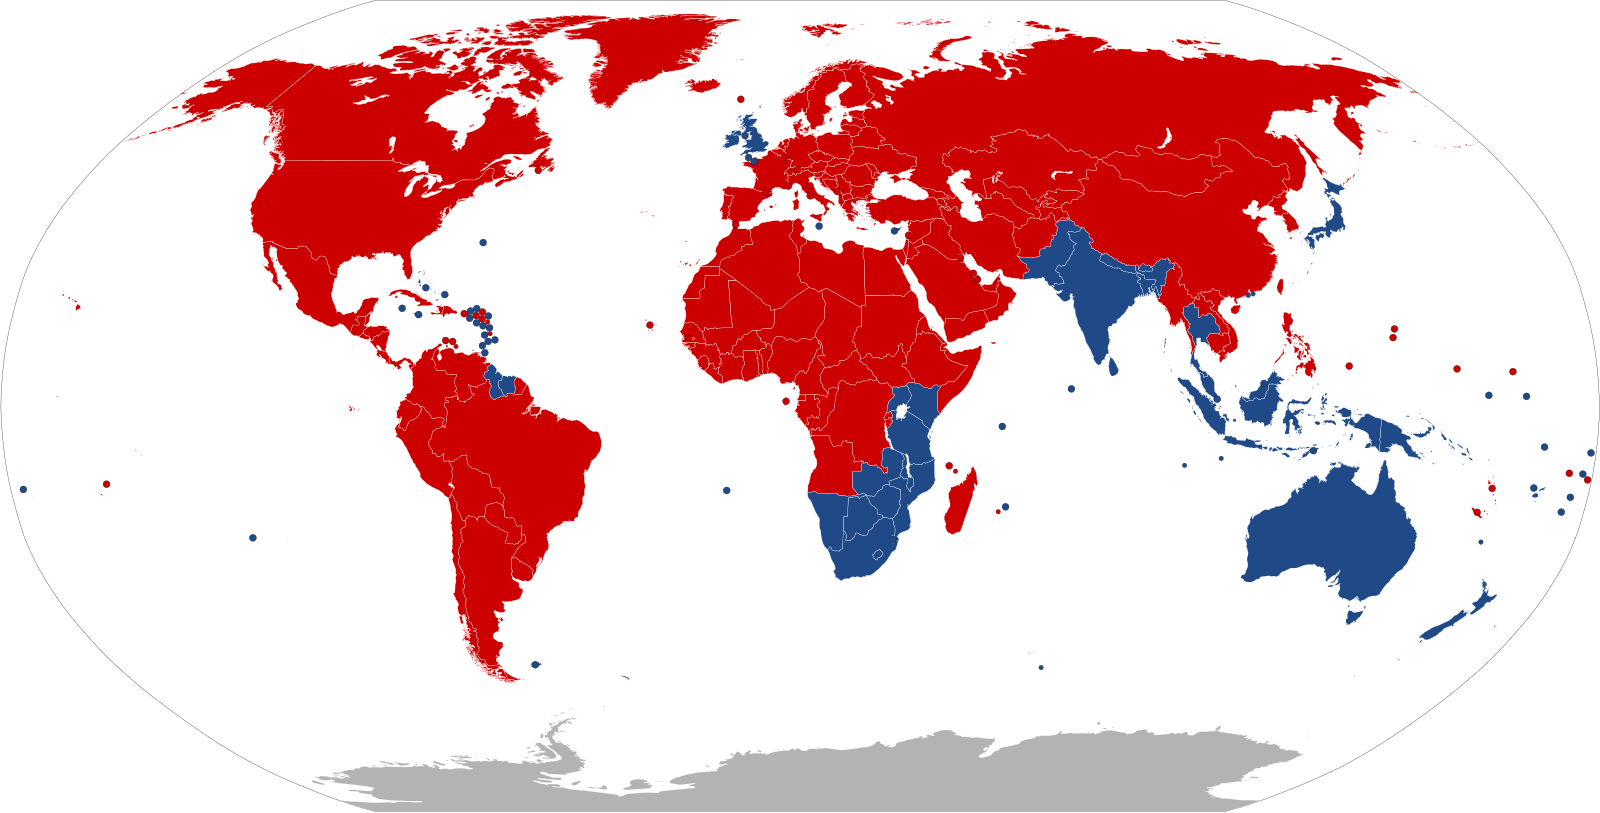 An image indicating right hand and left hand drive countries.